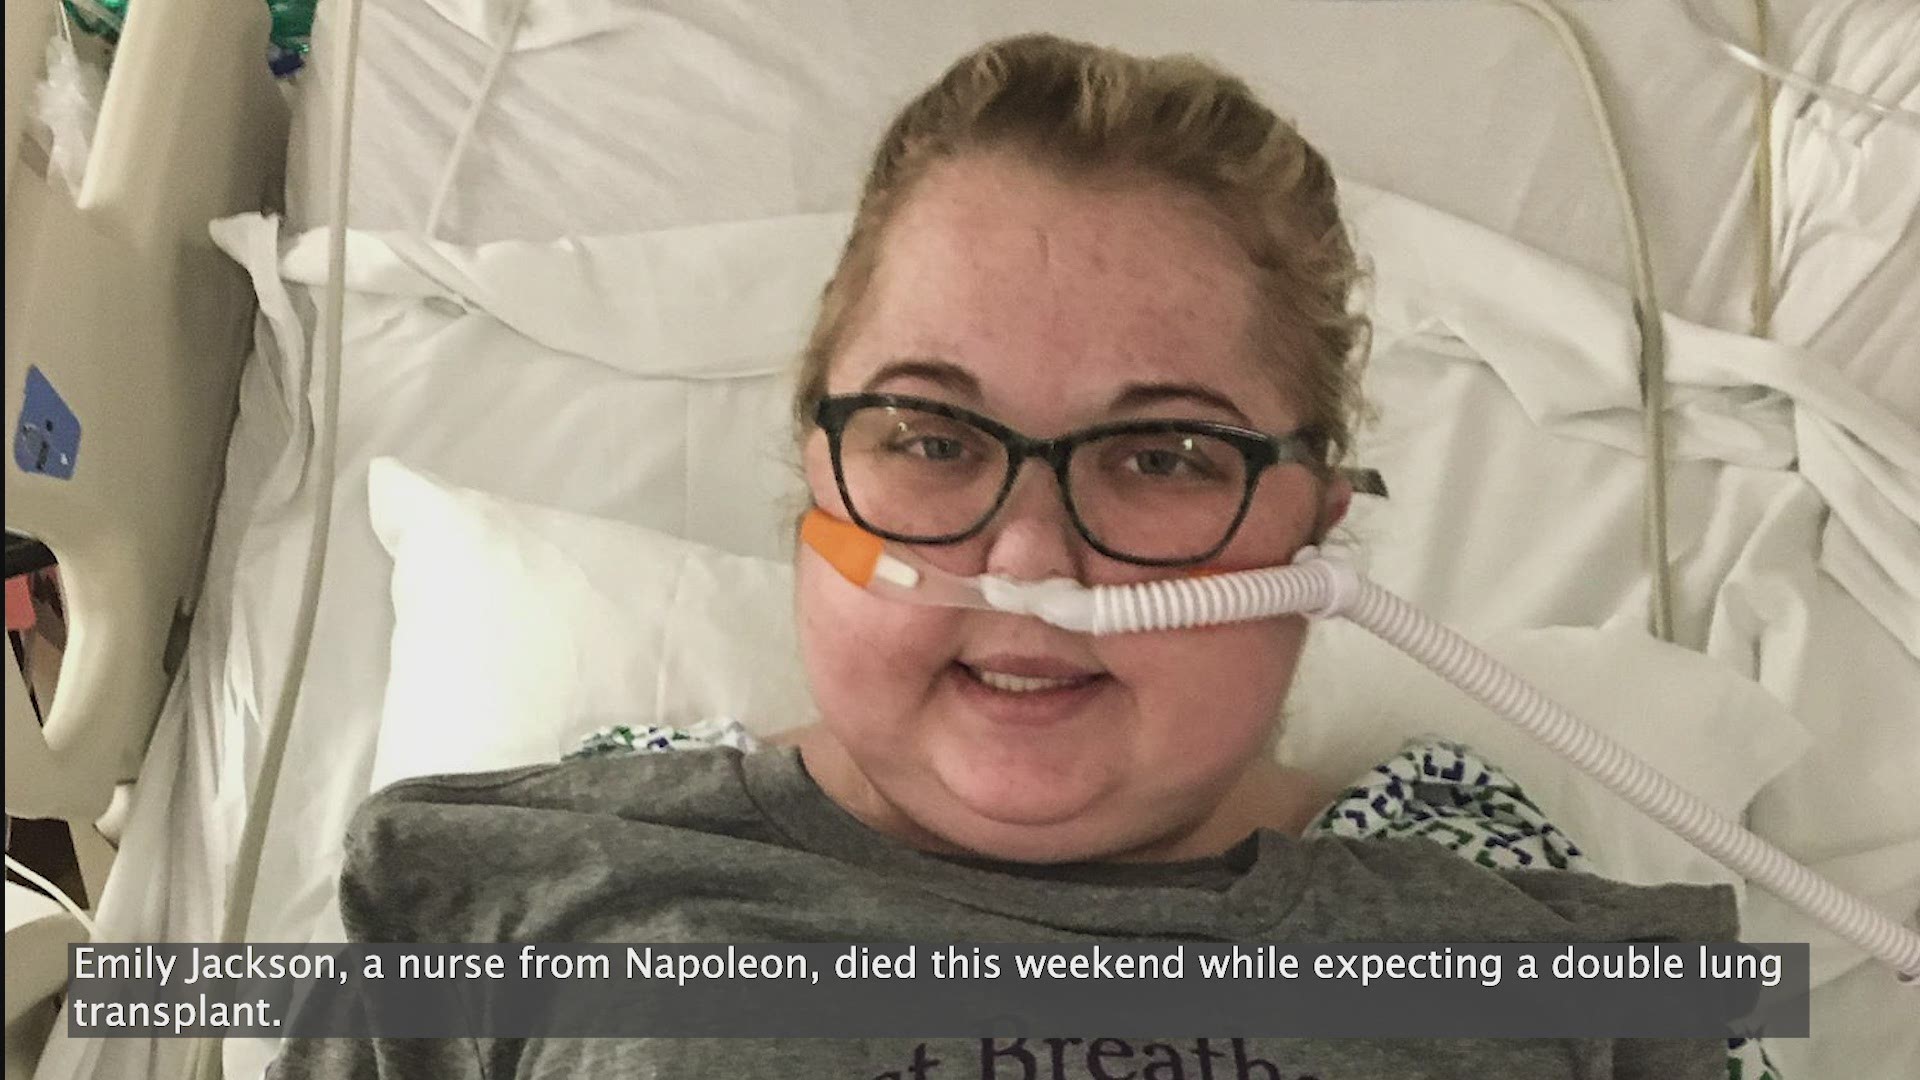 Emily Jackson, a cystic fibrosis patient, fought for her life awhile waiting for a double lung transplant at the Cleveland Clinic until the last minute.